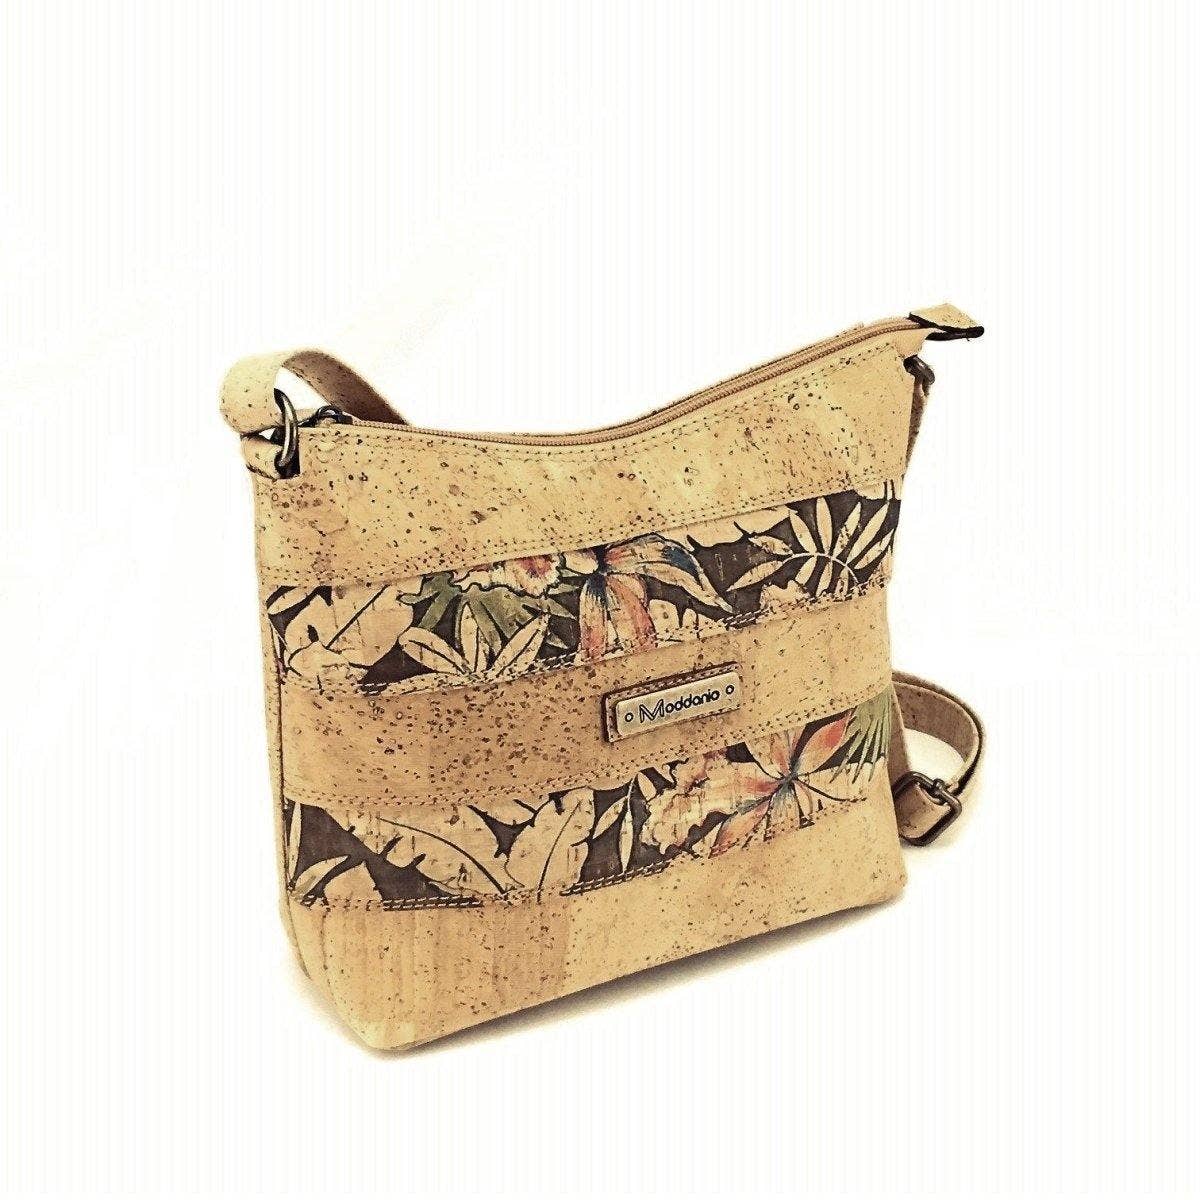 Cork Crossbody Bag and Vegan Purse for Women in Forest Green